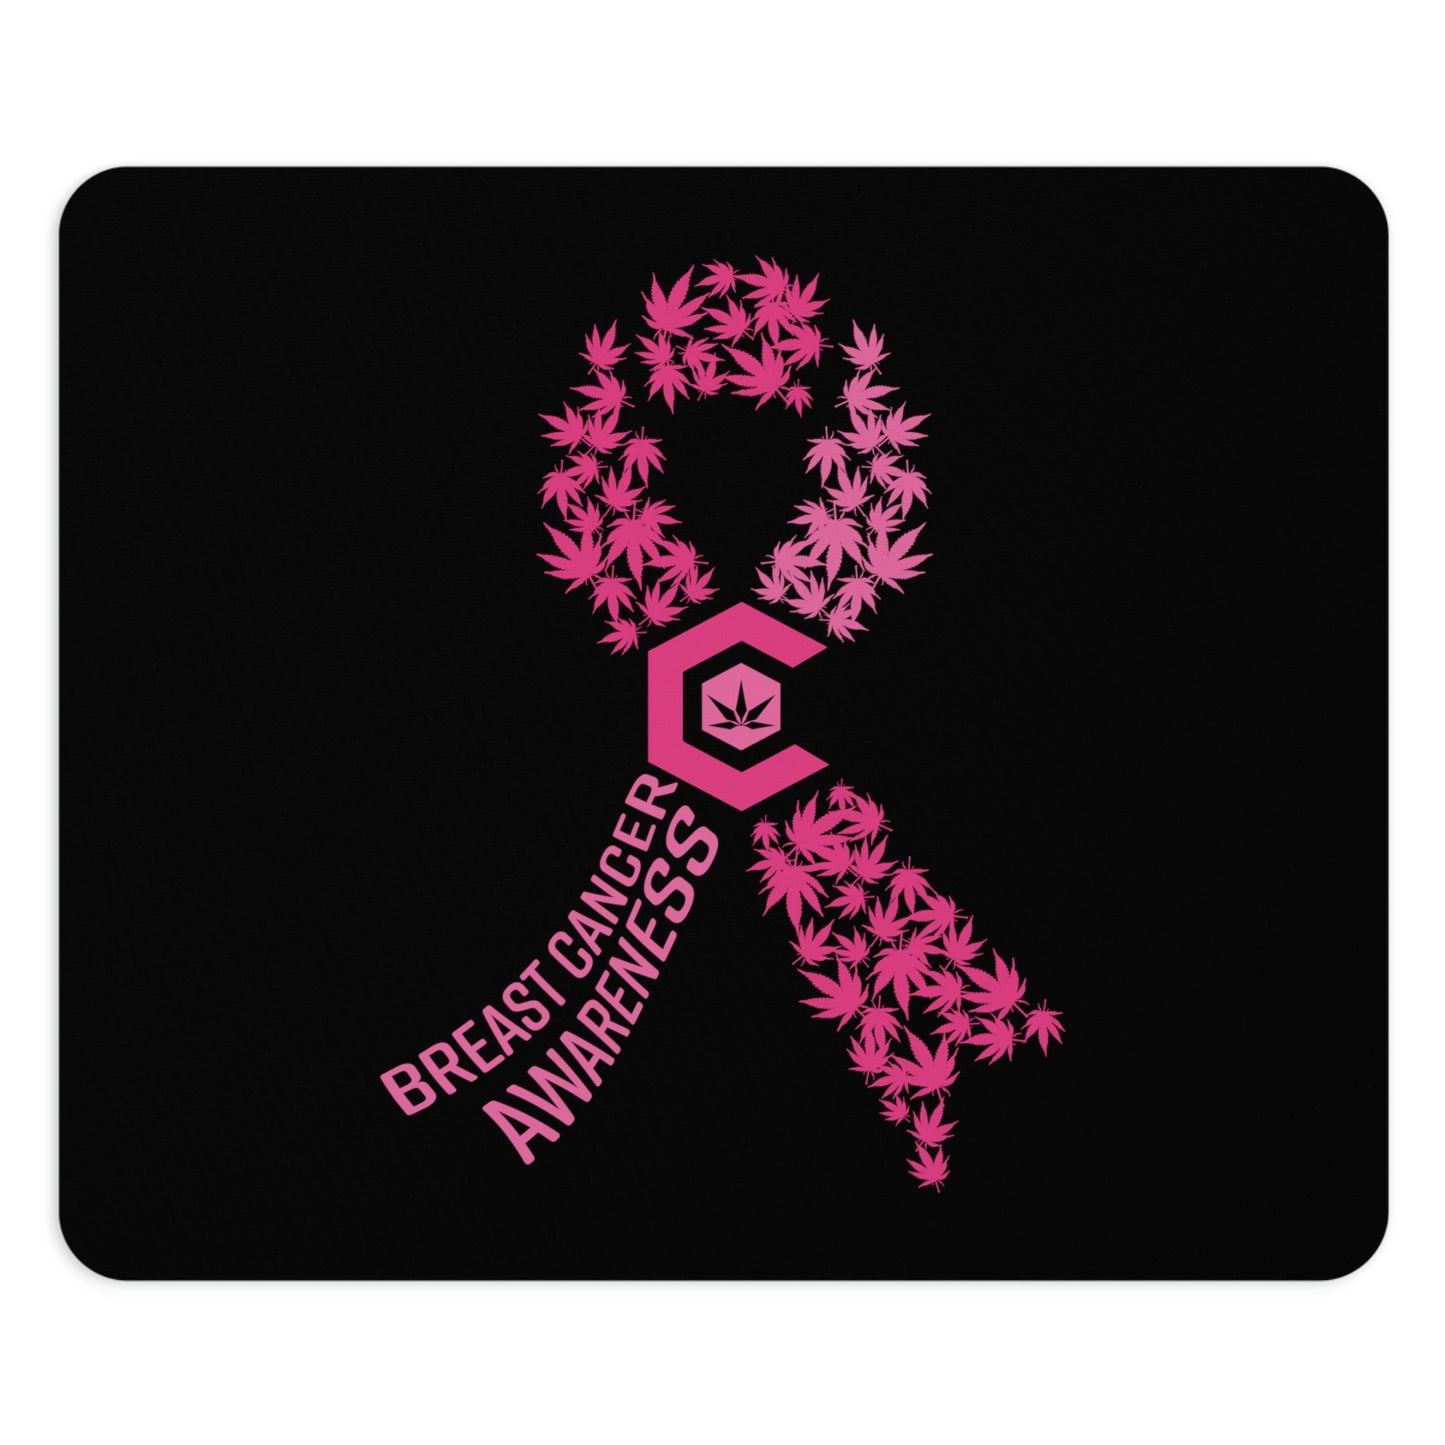 This awesome square Breast Cancer Awareness Mouse Pad is shown close up with pink cannabis leaves forming part of the ribbon and the words breast cancer awareness forming the other part of the iconic design.